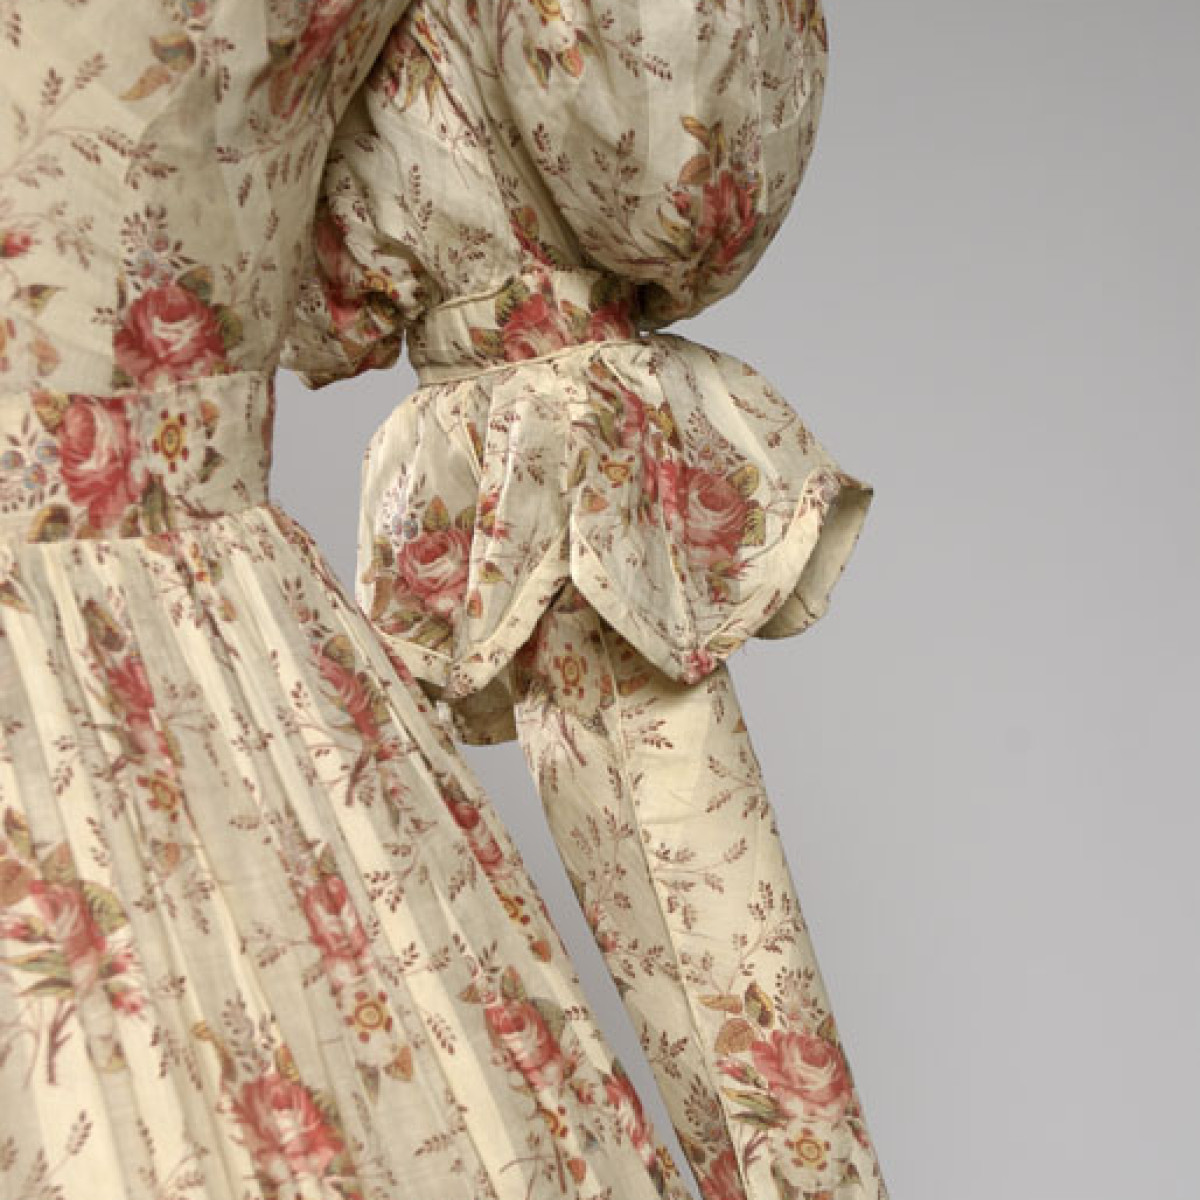 A detail of the sleeve of the Day Dress and floral print of the fabric.